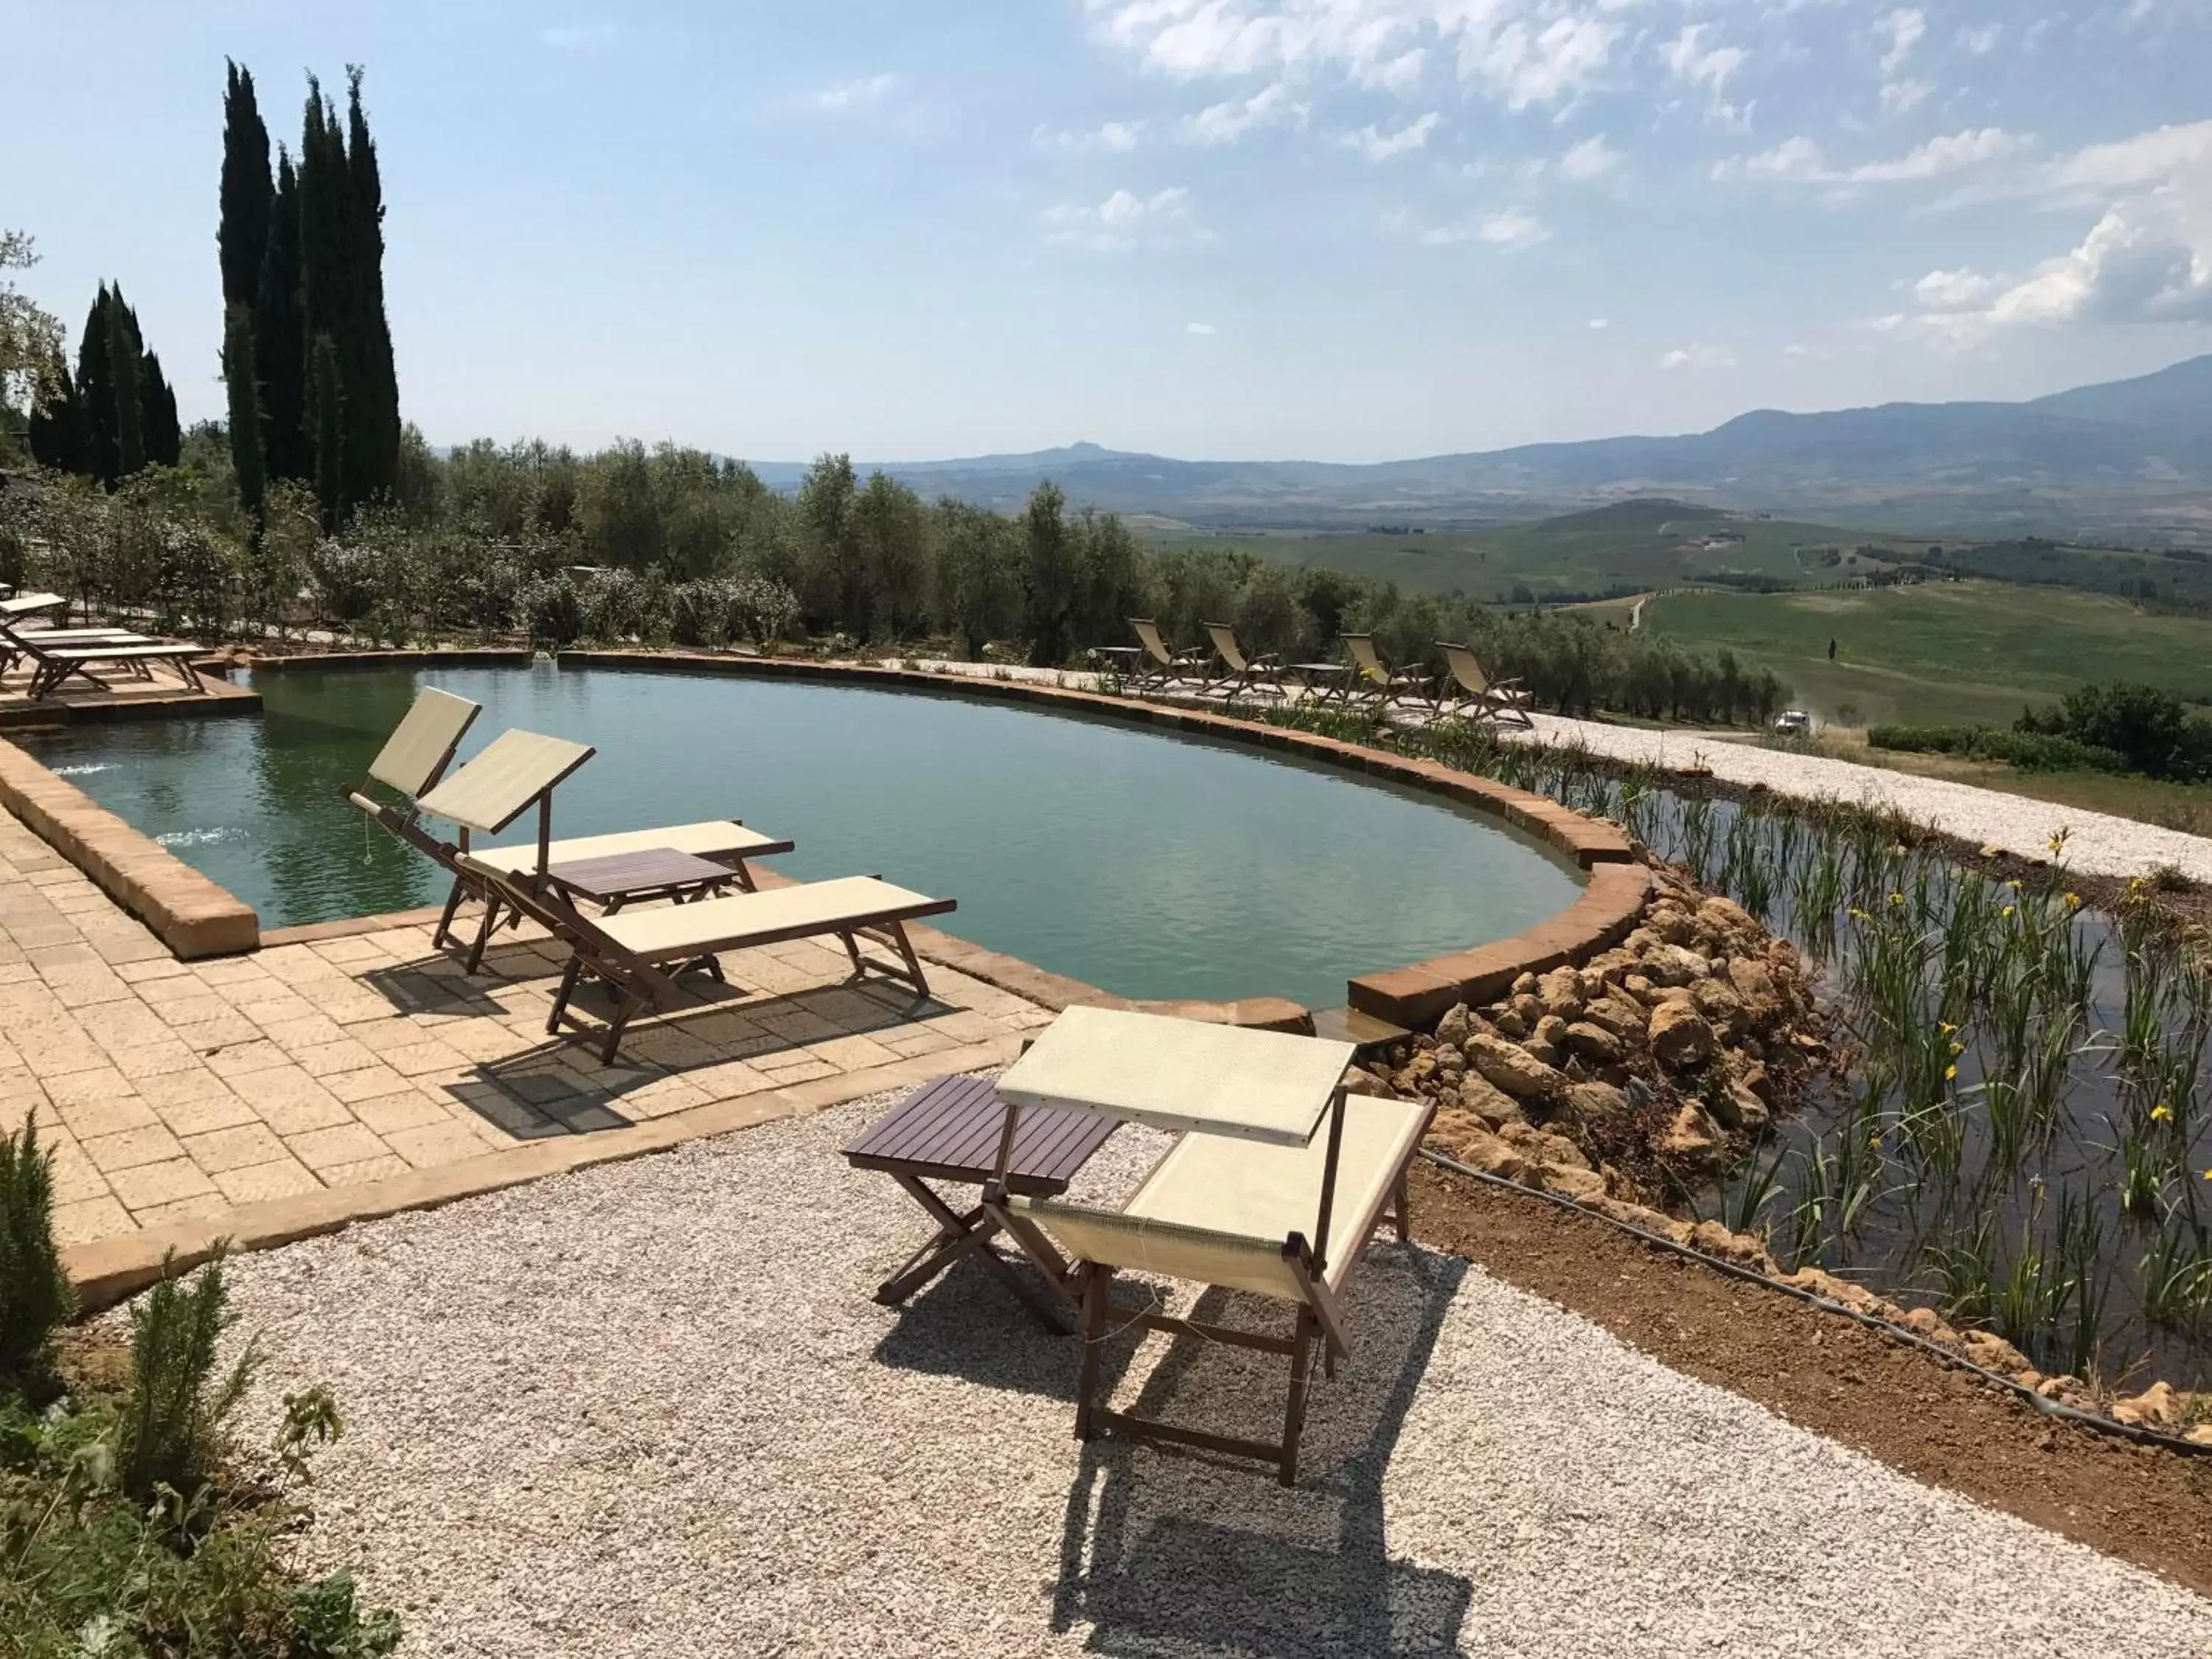 Open Air Bath, Swimming Pool in A440 in Tuscany